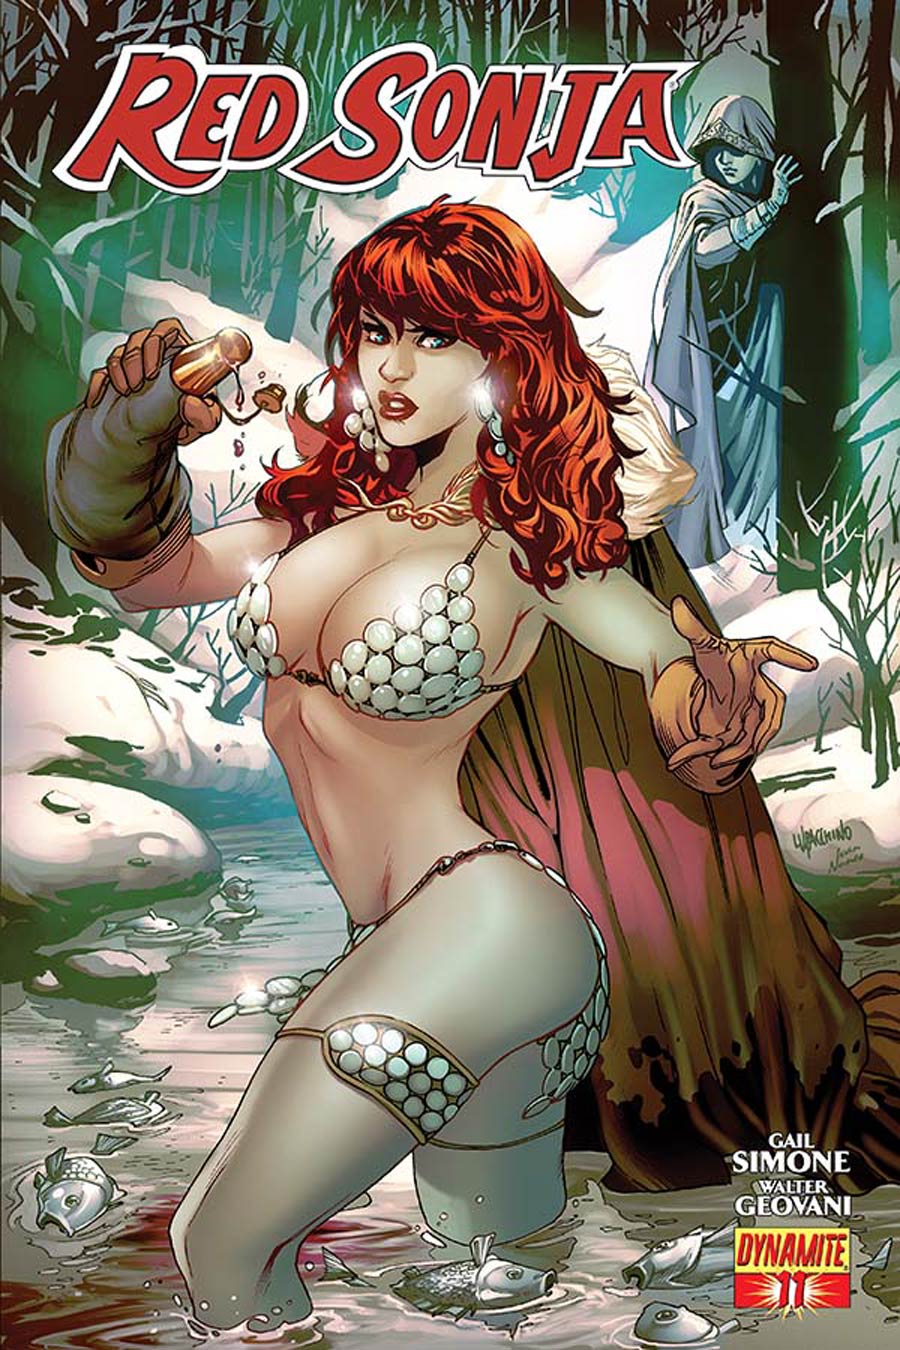 Red Sonja Vol 5 #11 Cover B Variant Emanuela Lupacchino Cover